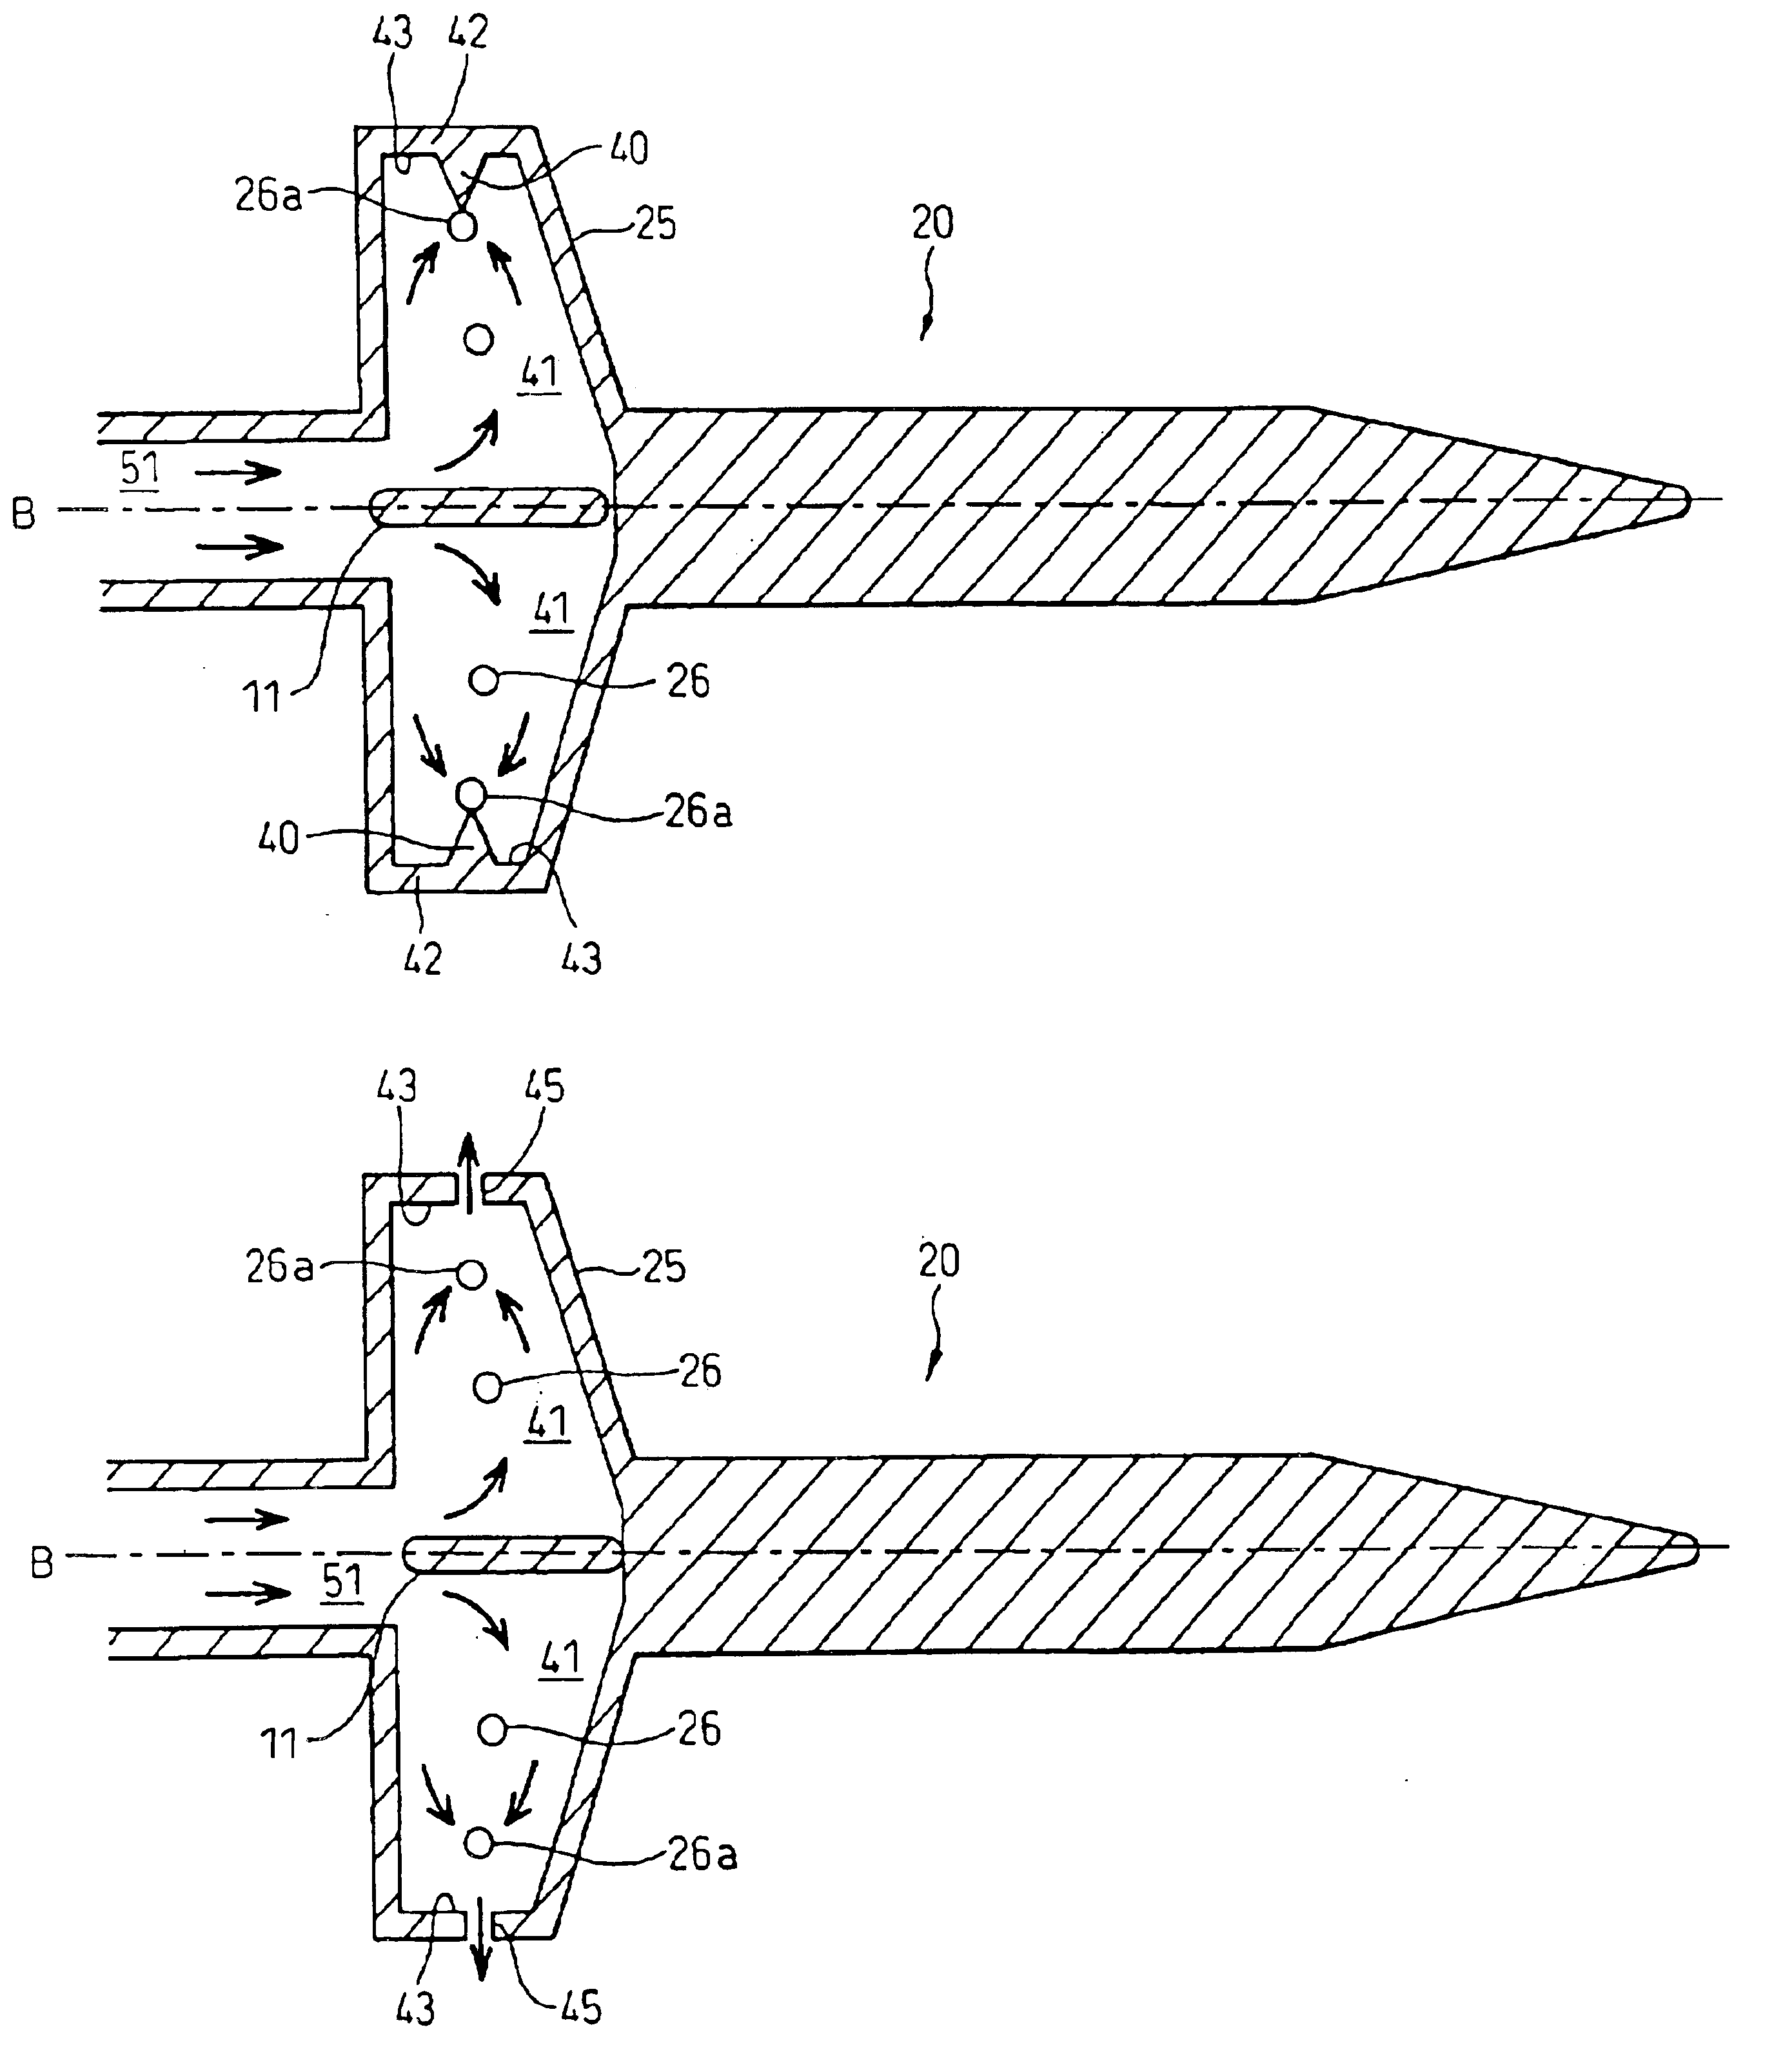 Combustor containing fuel nozzle